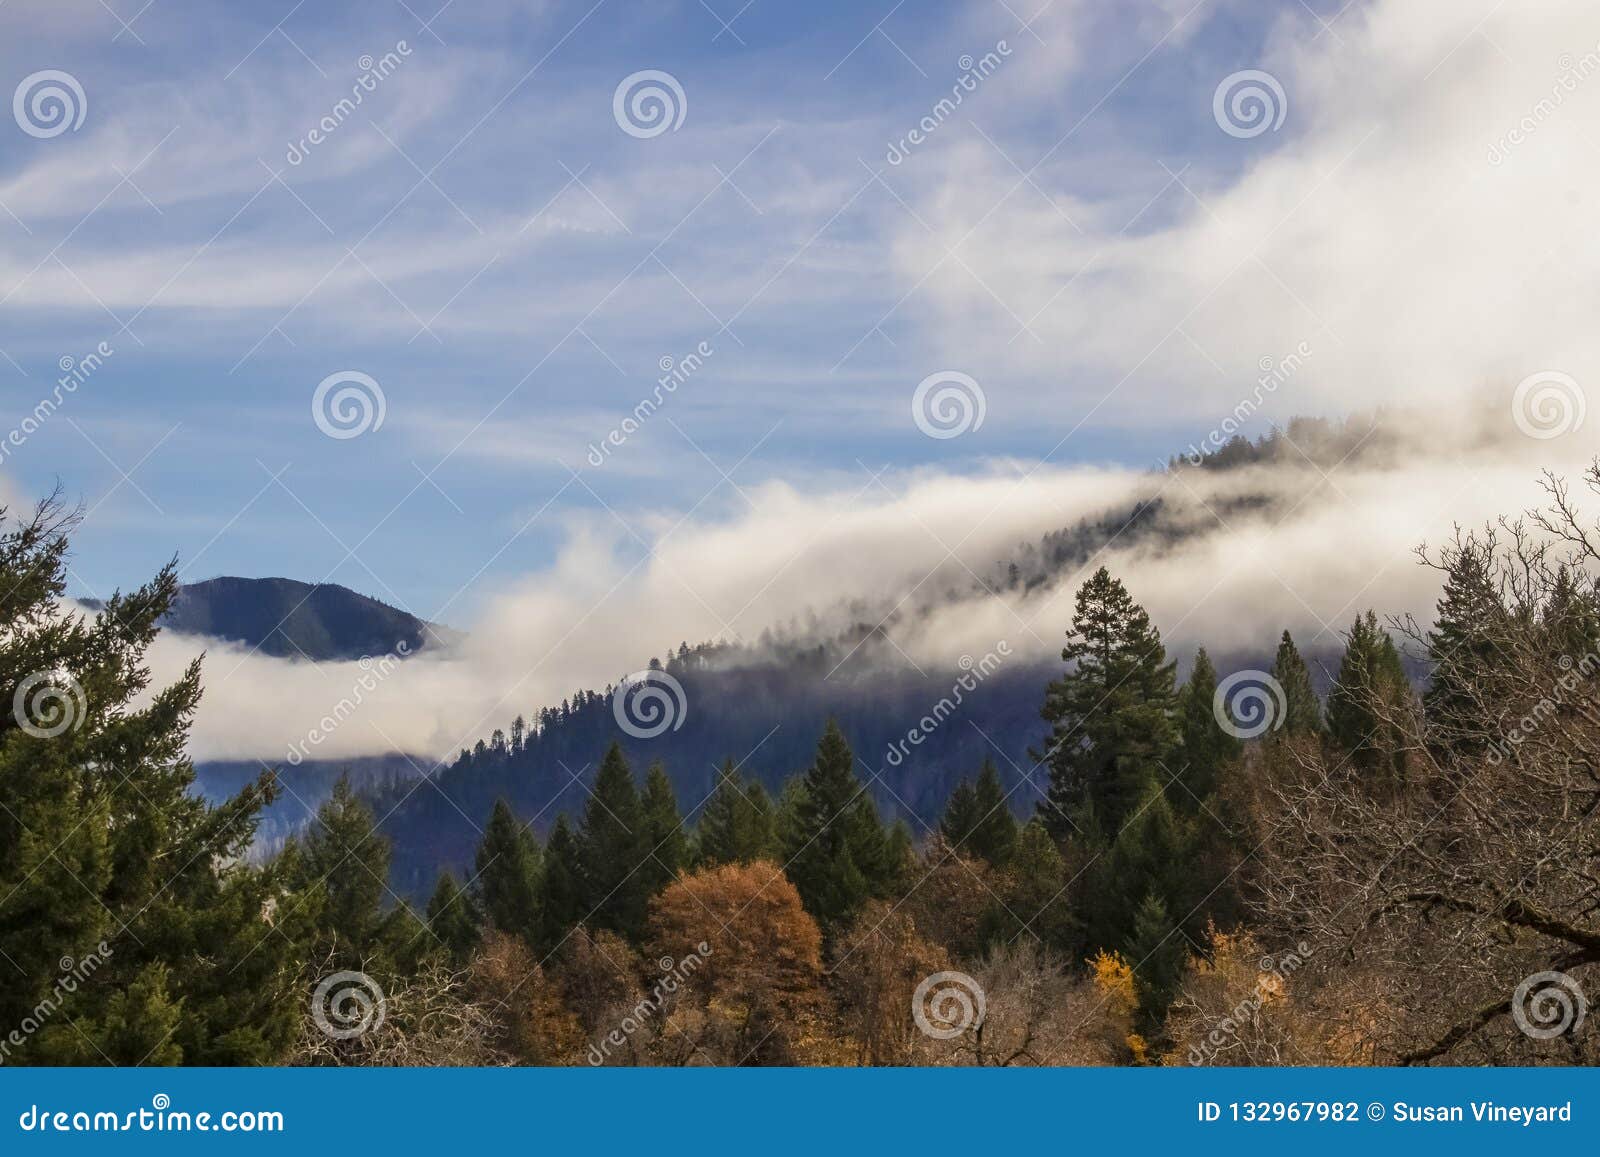 mountians enveloped with misty fog on an autumn day